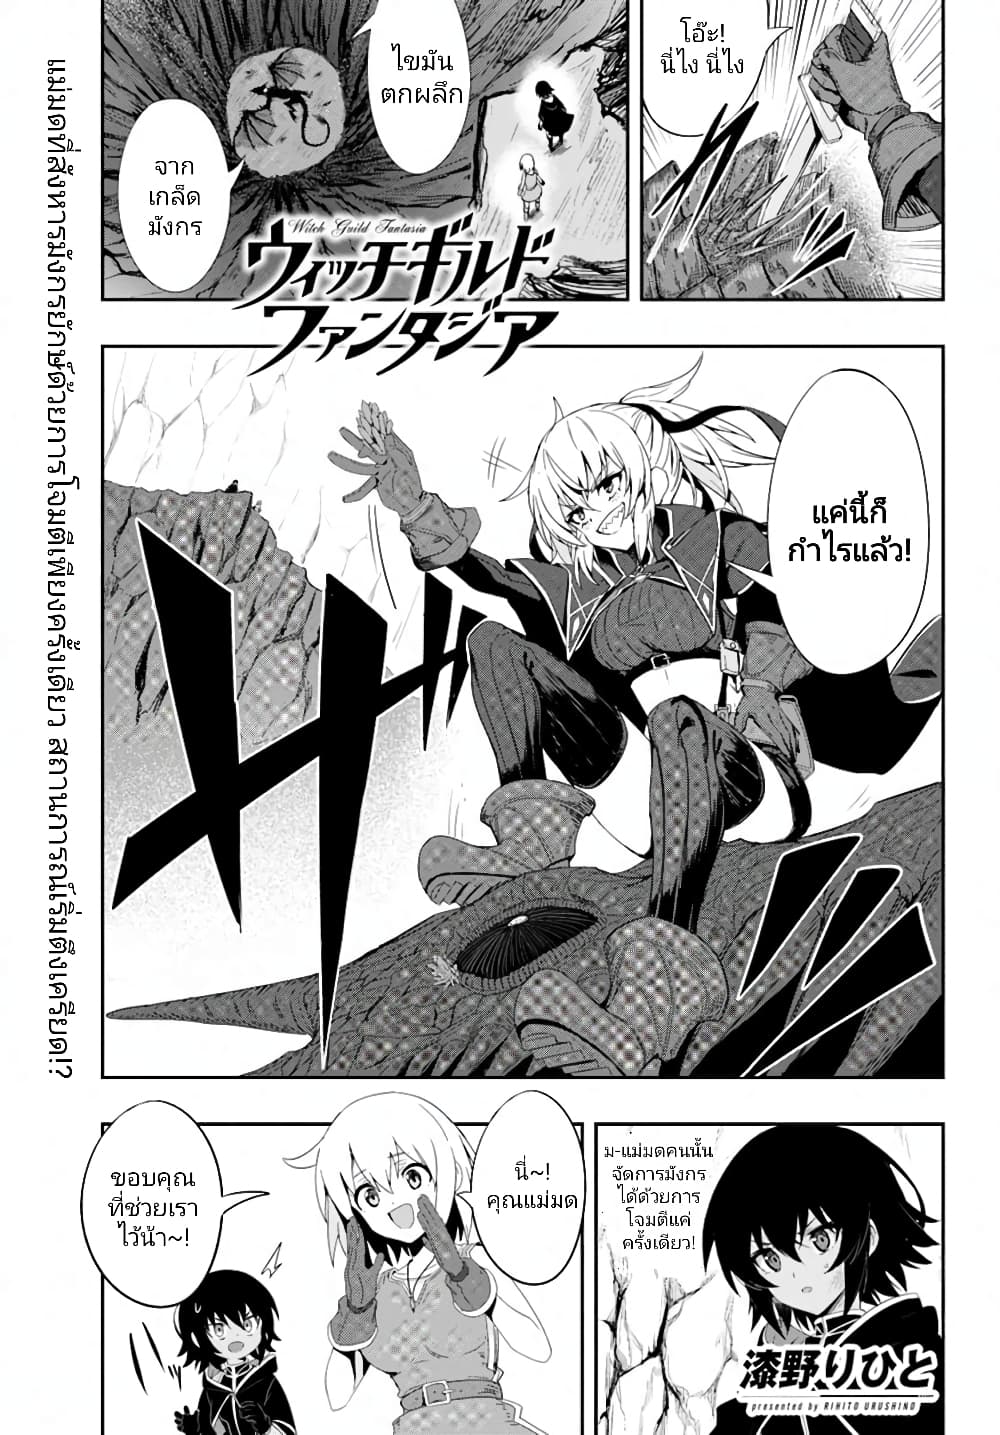 Witch Guild Fantasia 5 (2)